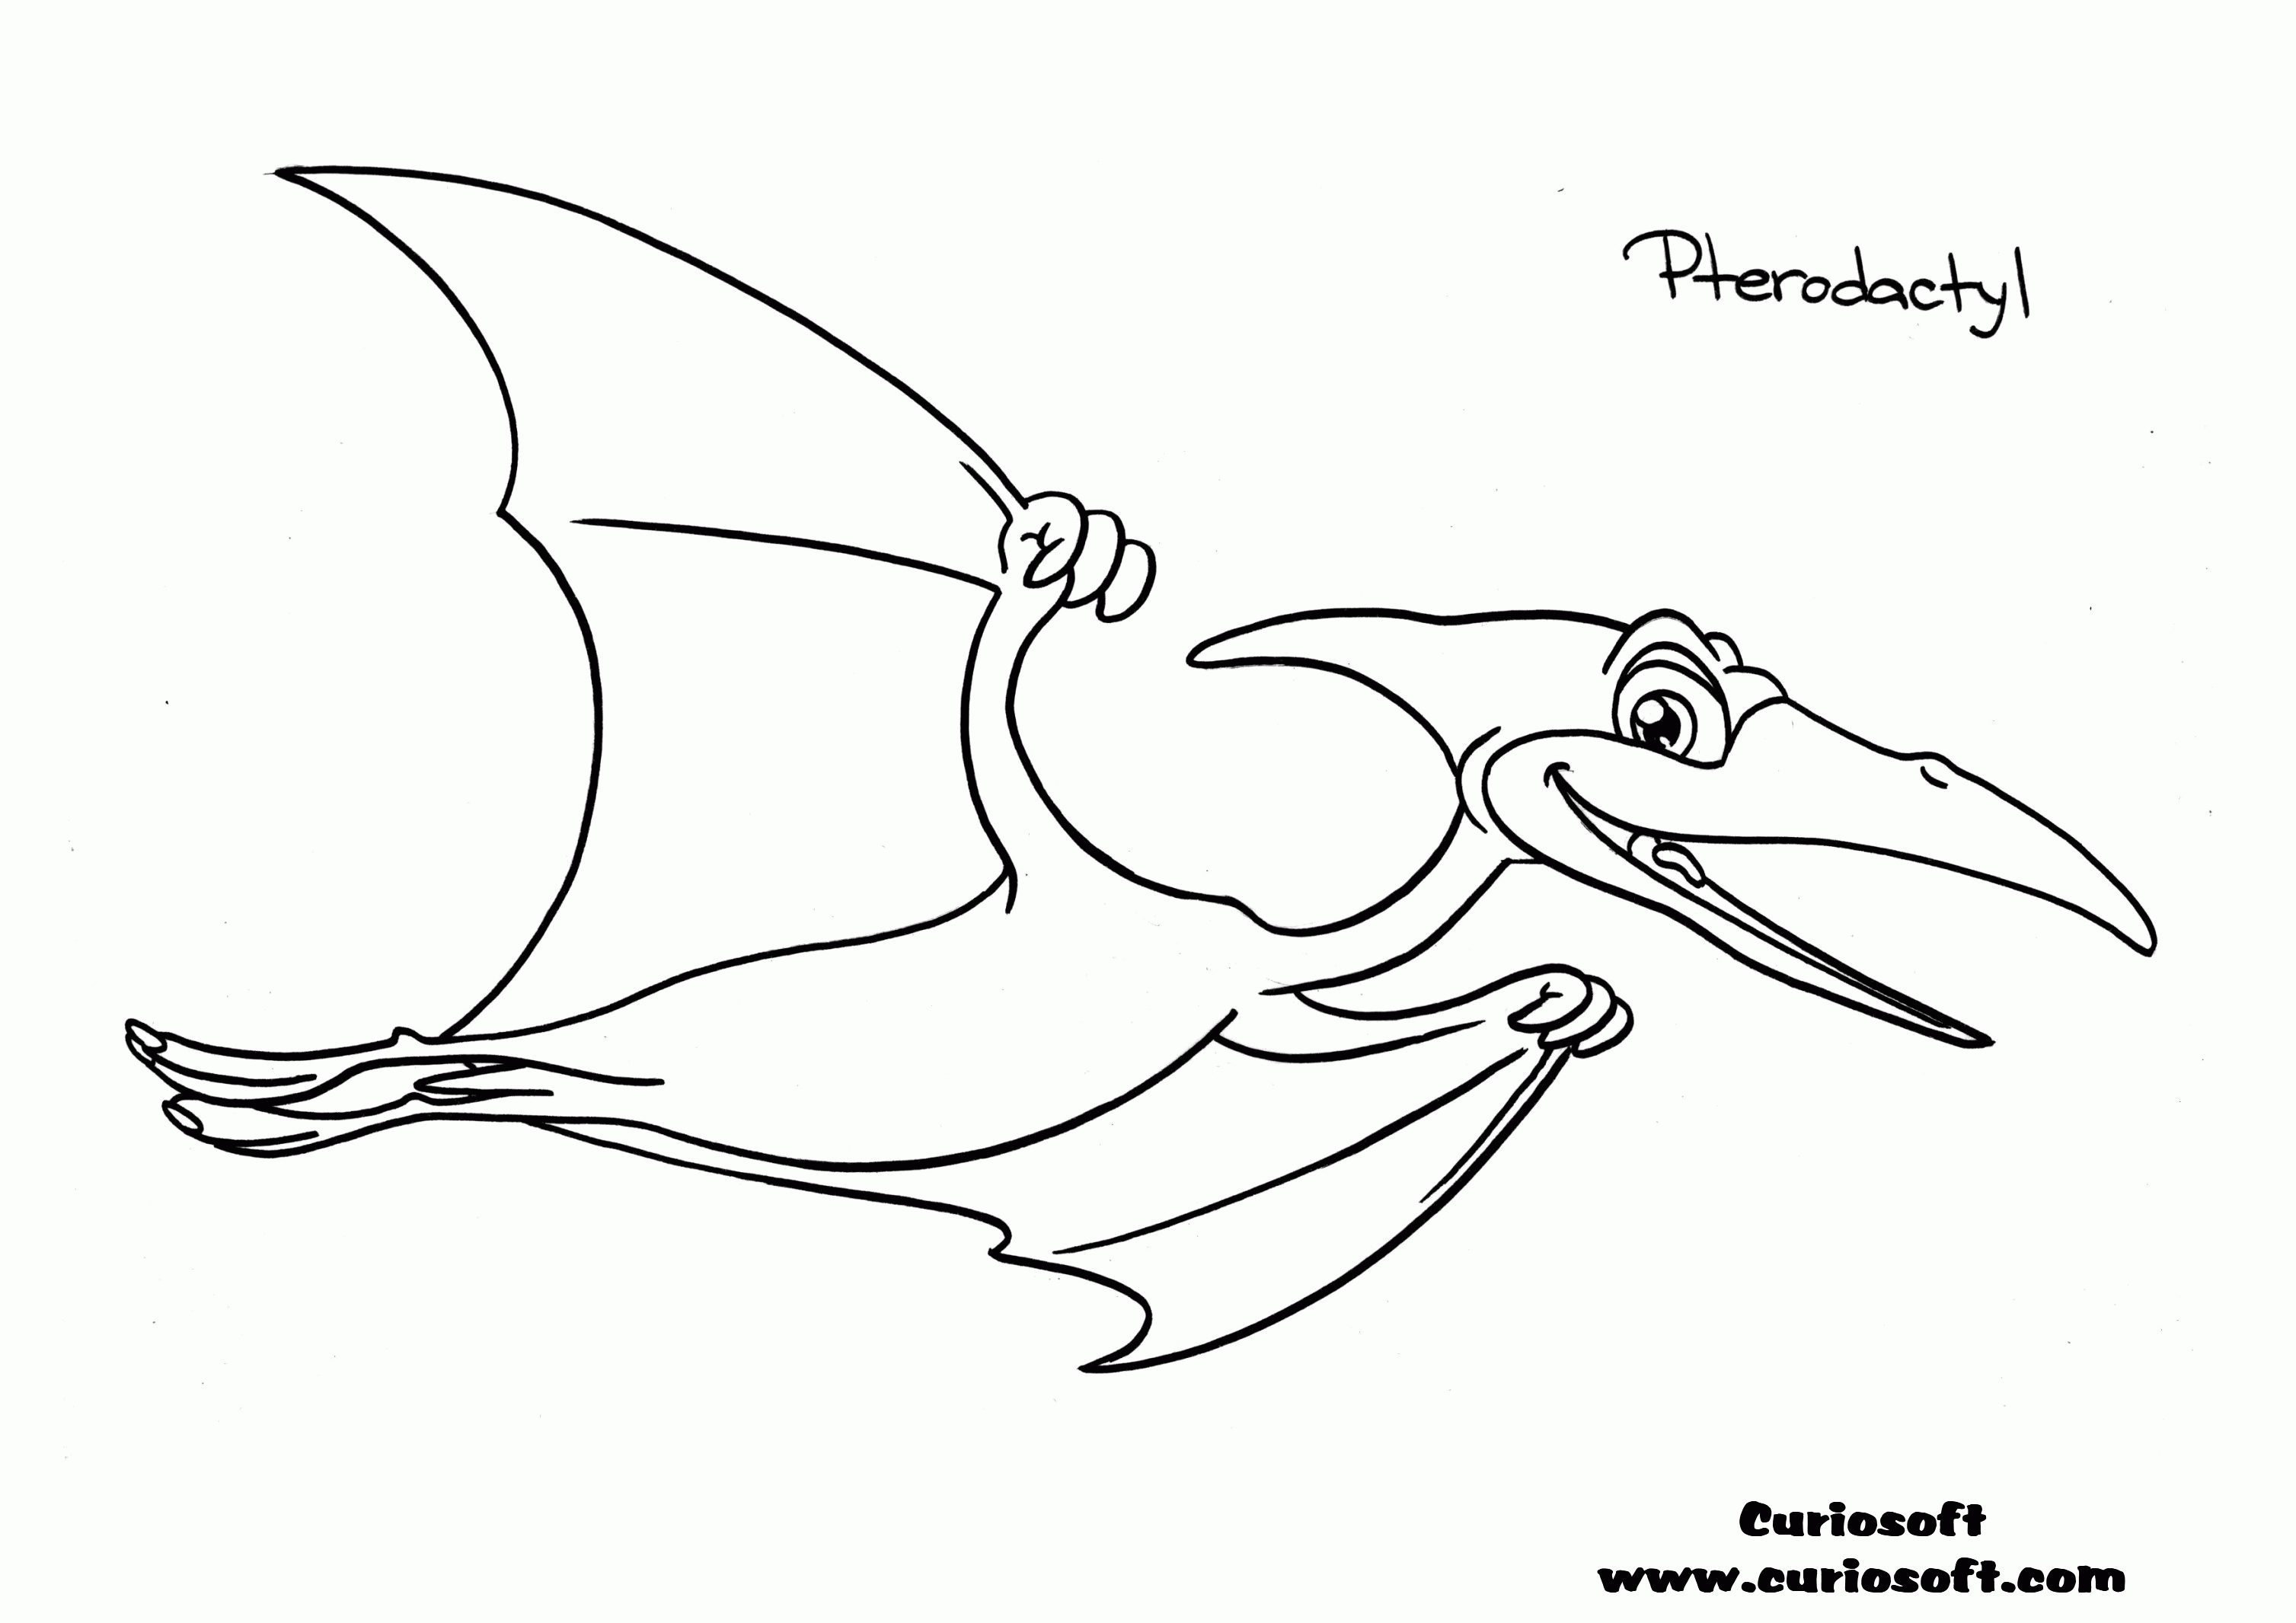 Pterodactyl Coloring Pages | Dinosaurs Pictures And Facts - Coloring Home